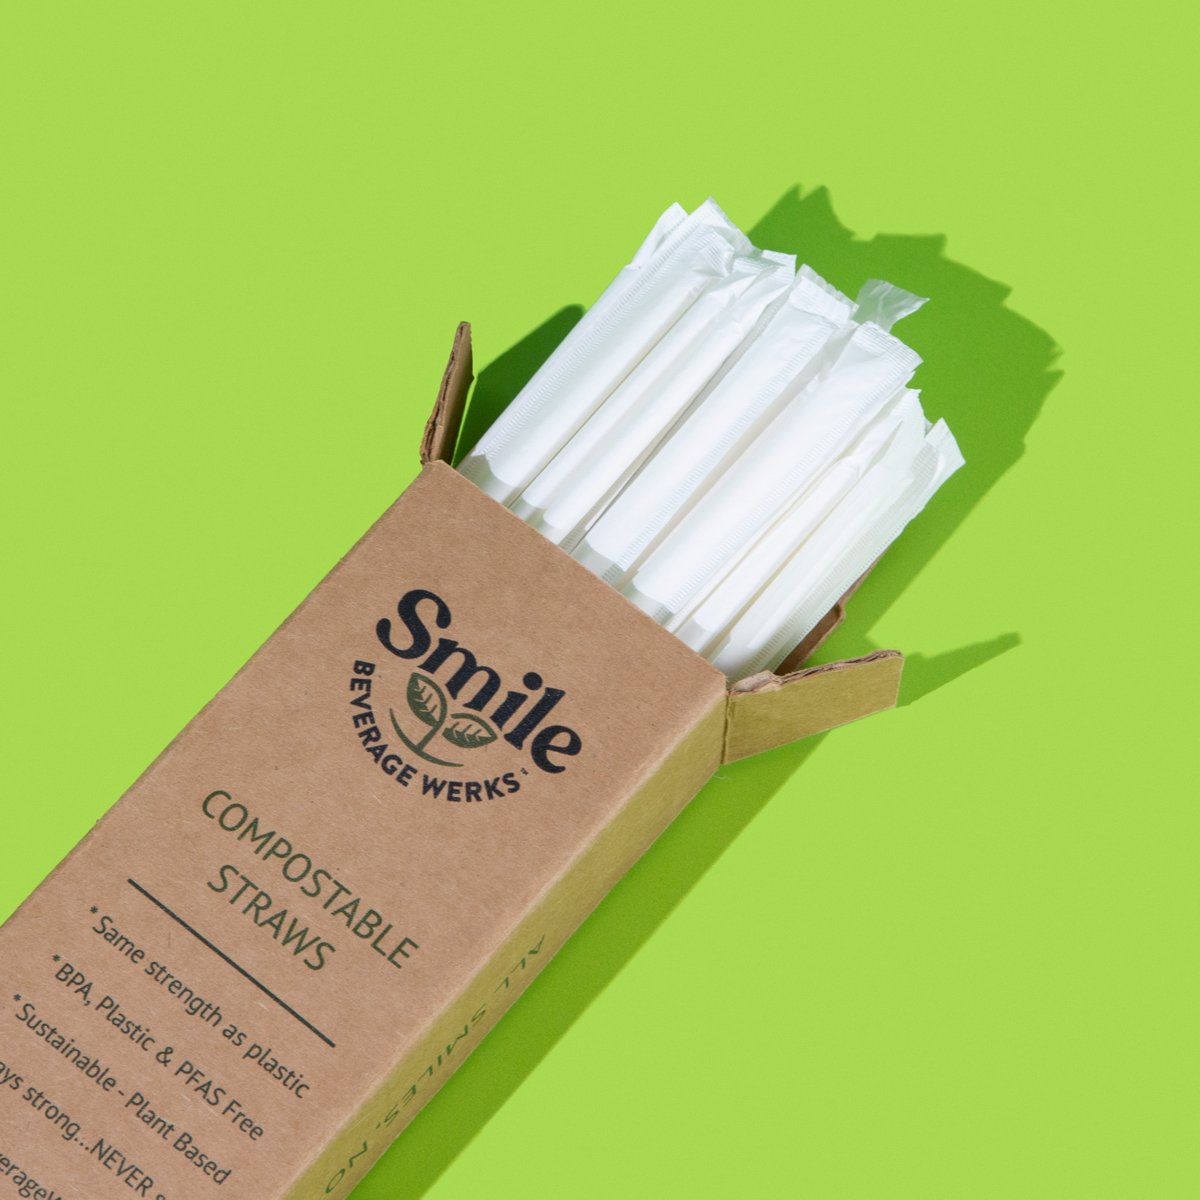 Sip happens, but waste doesn't have to! Choose our plant-based straws for a greener, cleaner refreshment💚 #ecofriendlystraws #sustainablestraws #compostablestraws #foodpackagingsolutions #foodpackagingsolution #nowasteliving #goingzerowaste #zerowastehome #zerowasteliving